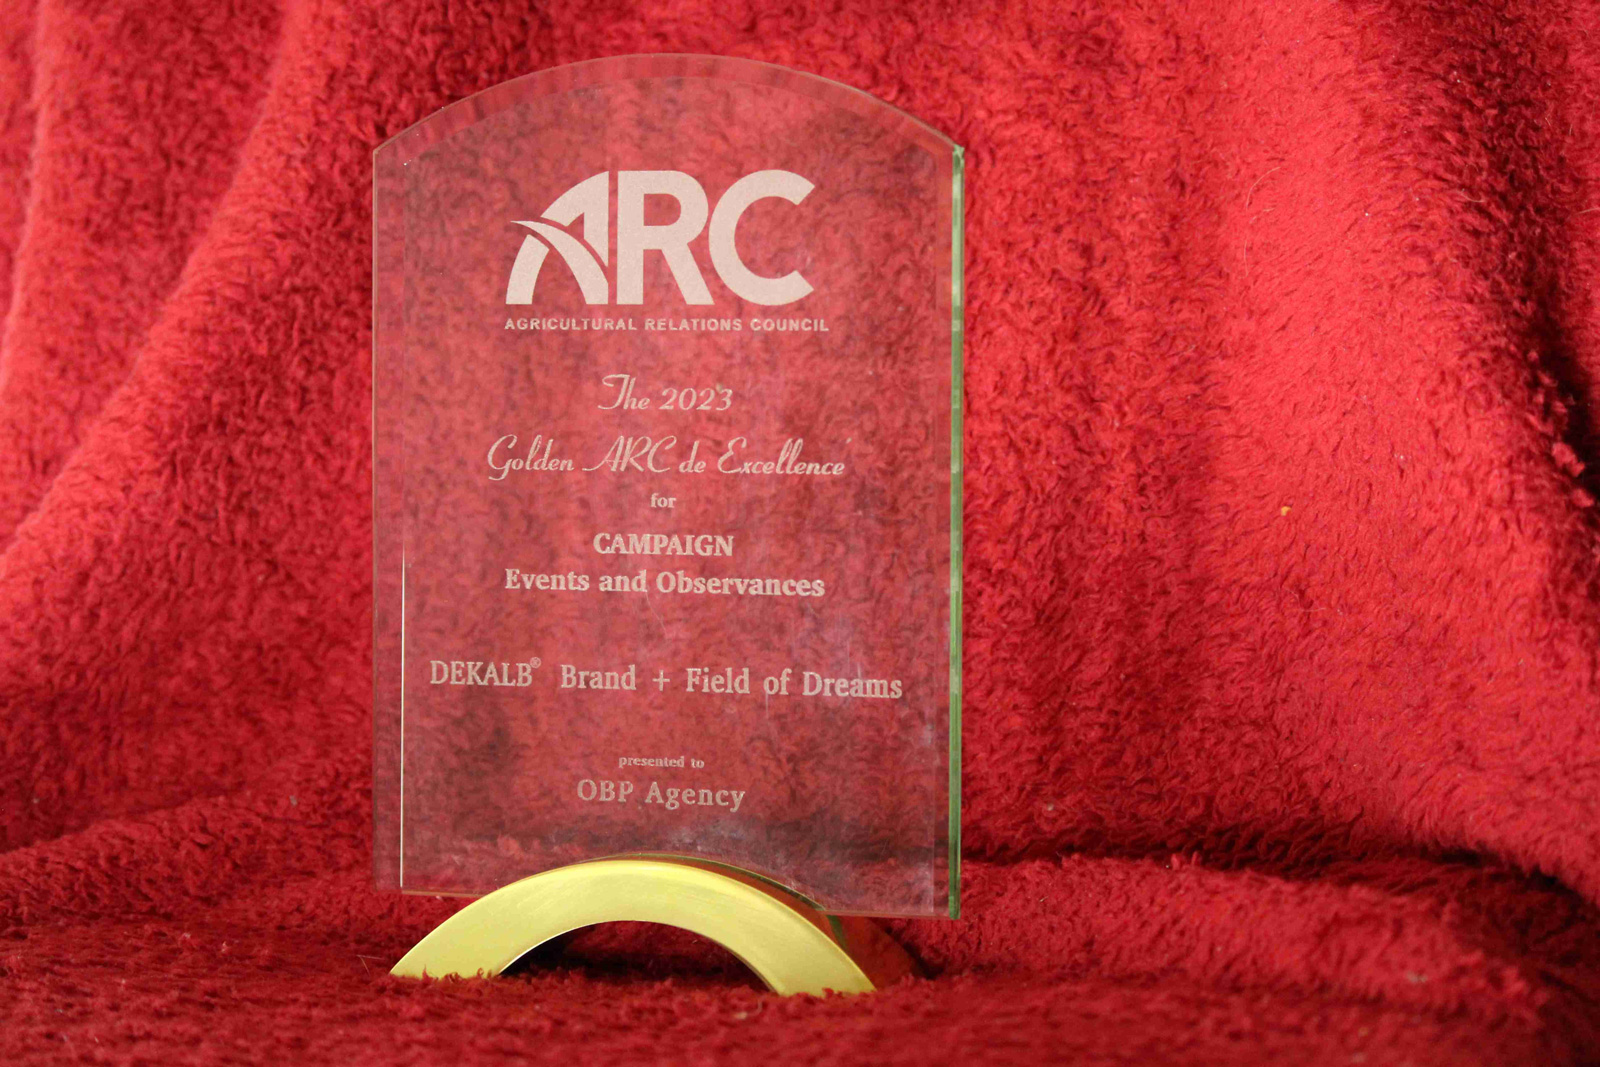 A 2023 Golden ARC de Excellence award sits on a red blanket. The award is for Campaign Events & Observances for DEKALB Brand + Field of Dreams presented to OBP Agency.